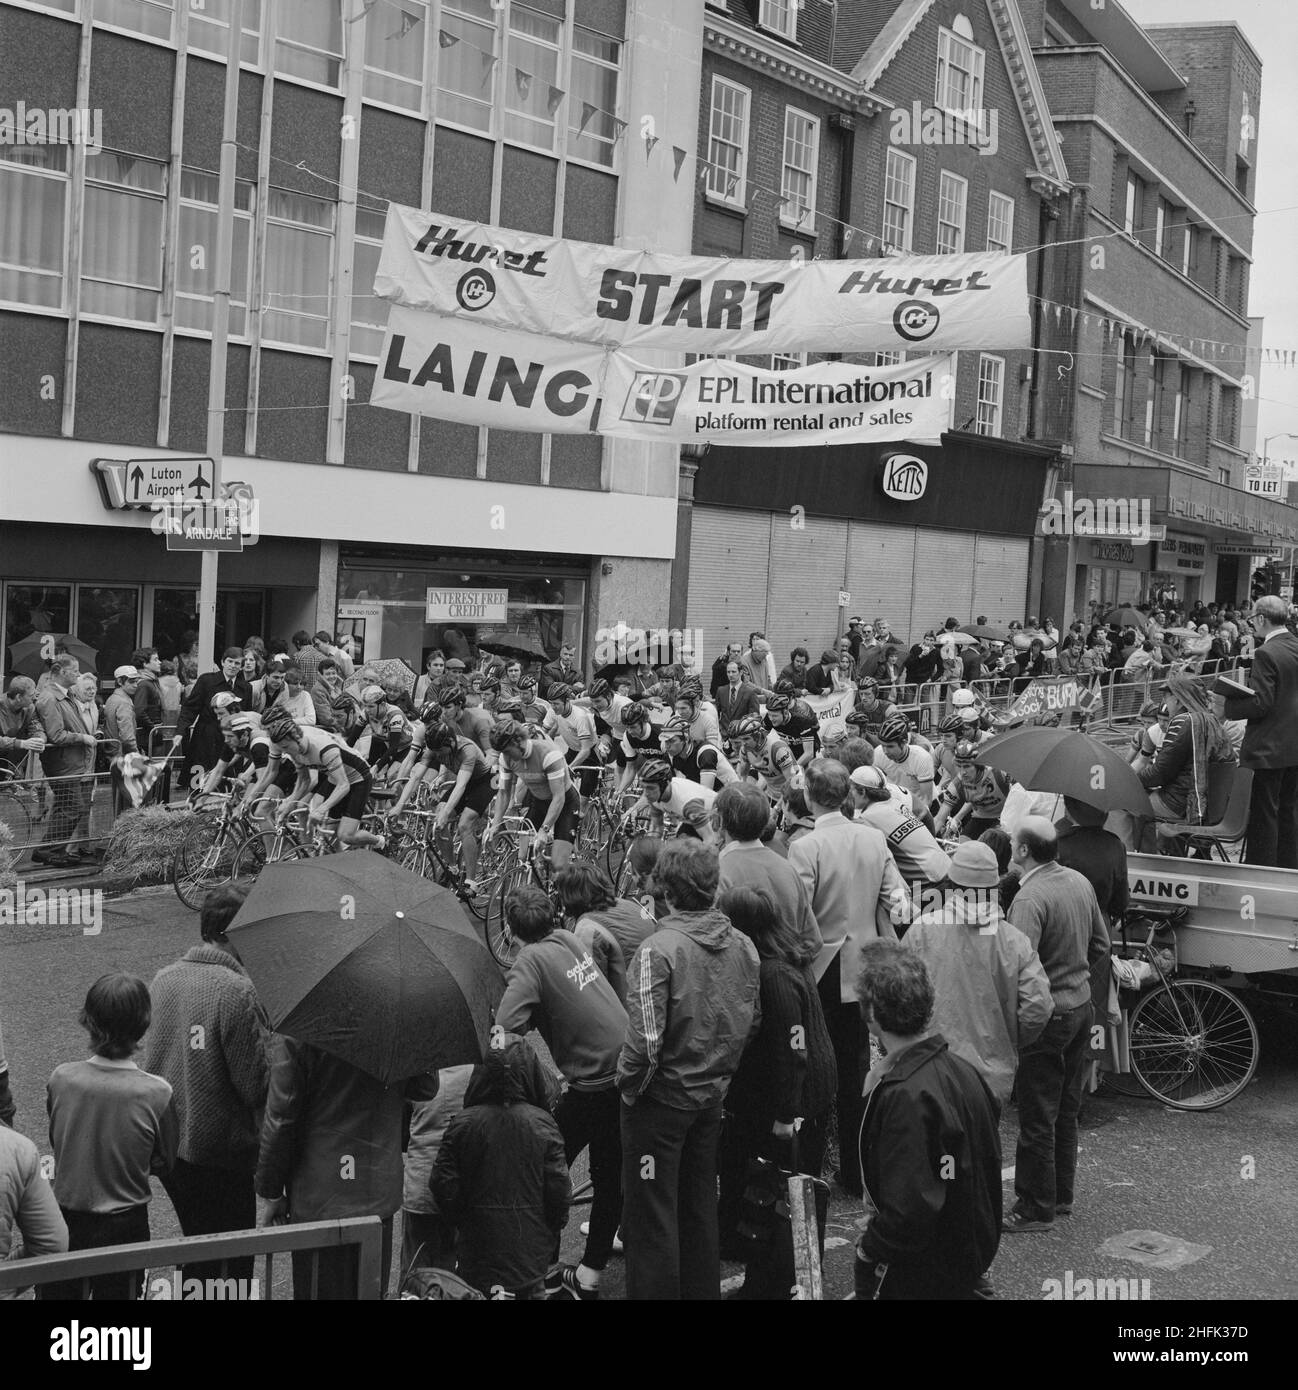 Luton Town Hall, Luton, Bedfordshire, 24/05/1981. People watching a cycle race, sponsored by Laing and EPL International, passing through Luton town centre. In the negative register for the collection, the subject of the photograph has been referred to as 'LUTON TOWN CENTRE CYCLE RACE IET J/L EPL SPONSOR' Stock Photo